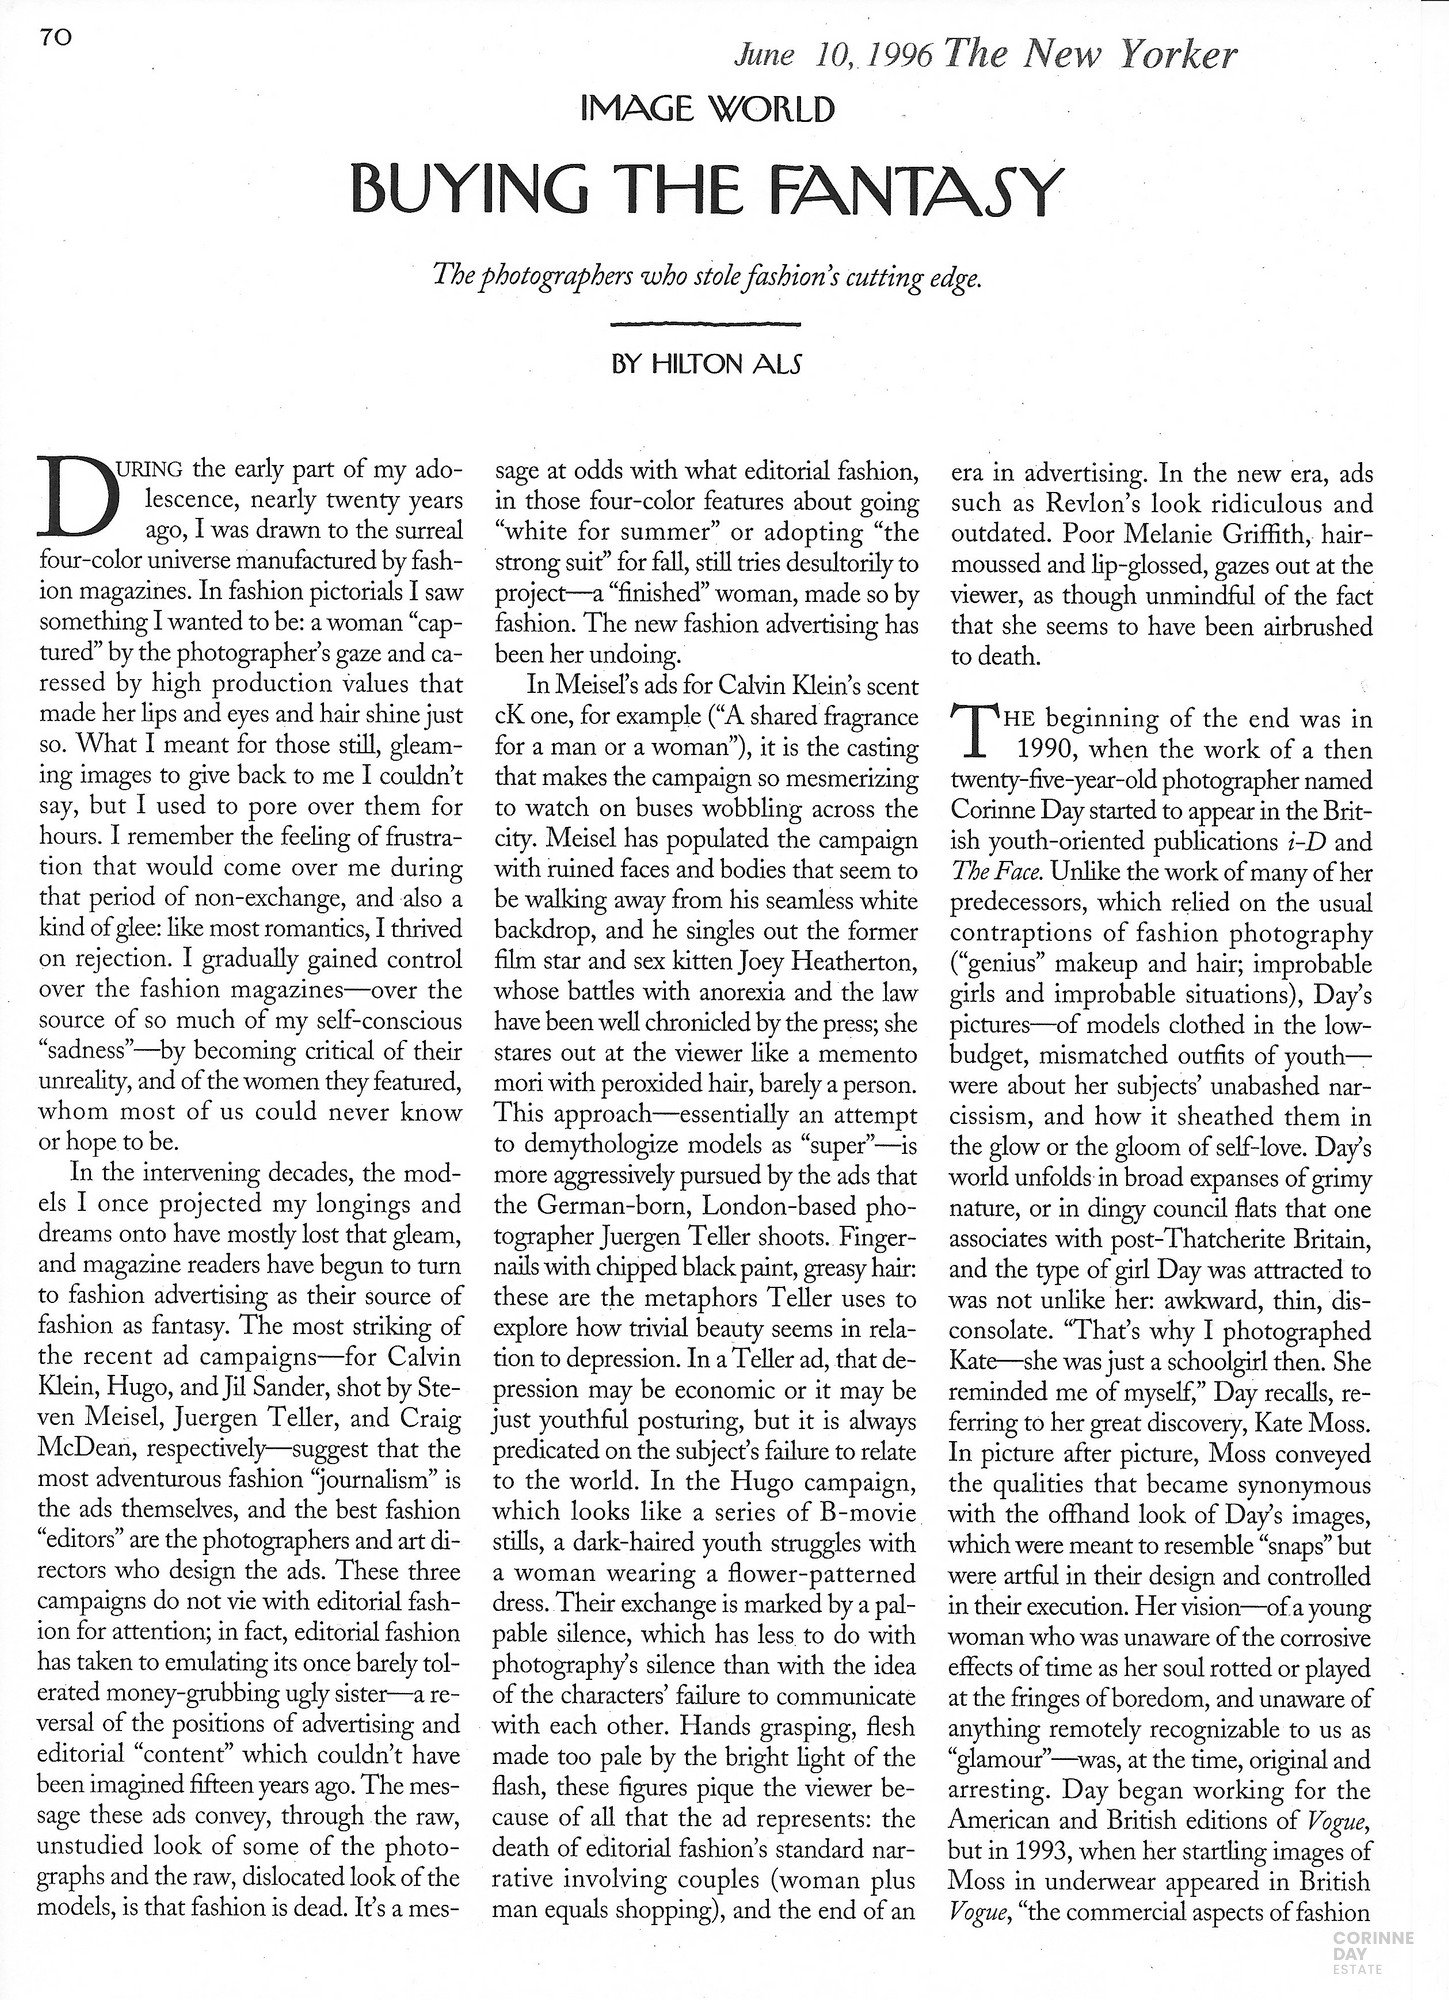 Buying the Fantasy, The New Yorker, 10 Jun 1996 — Image 1 of 2